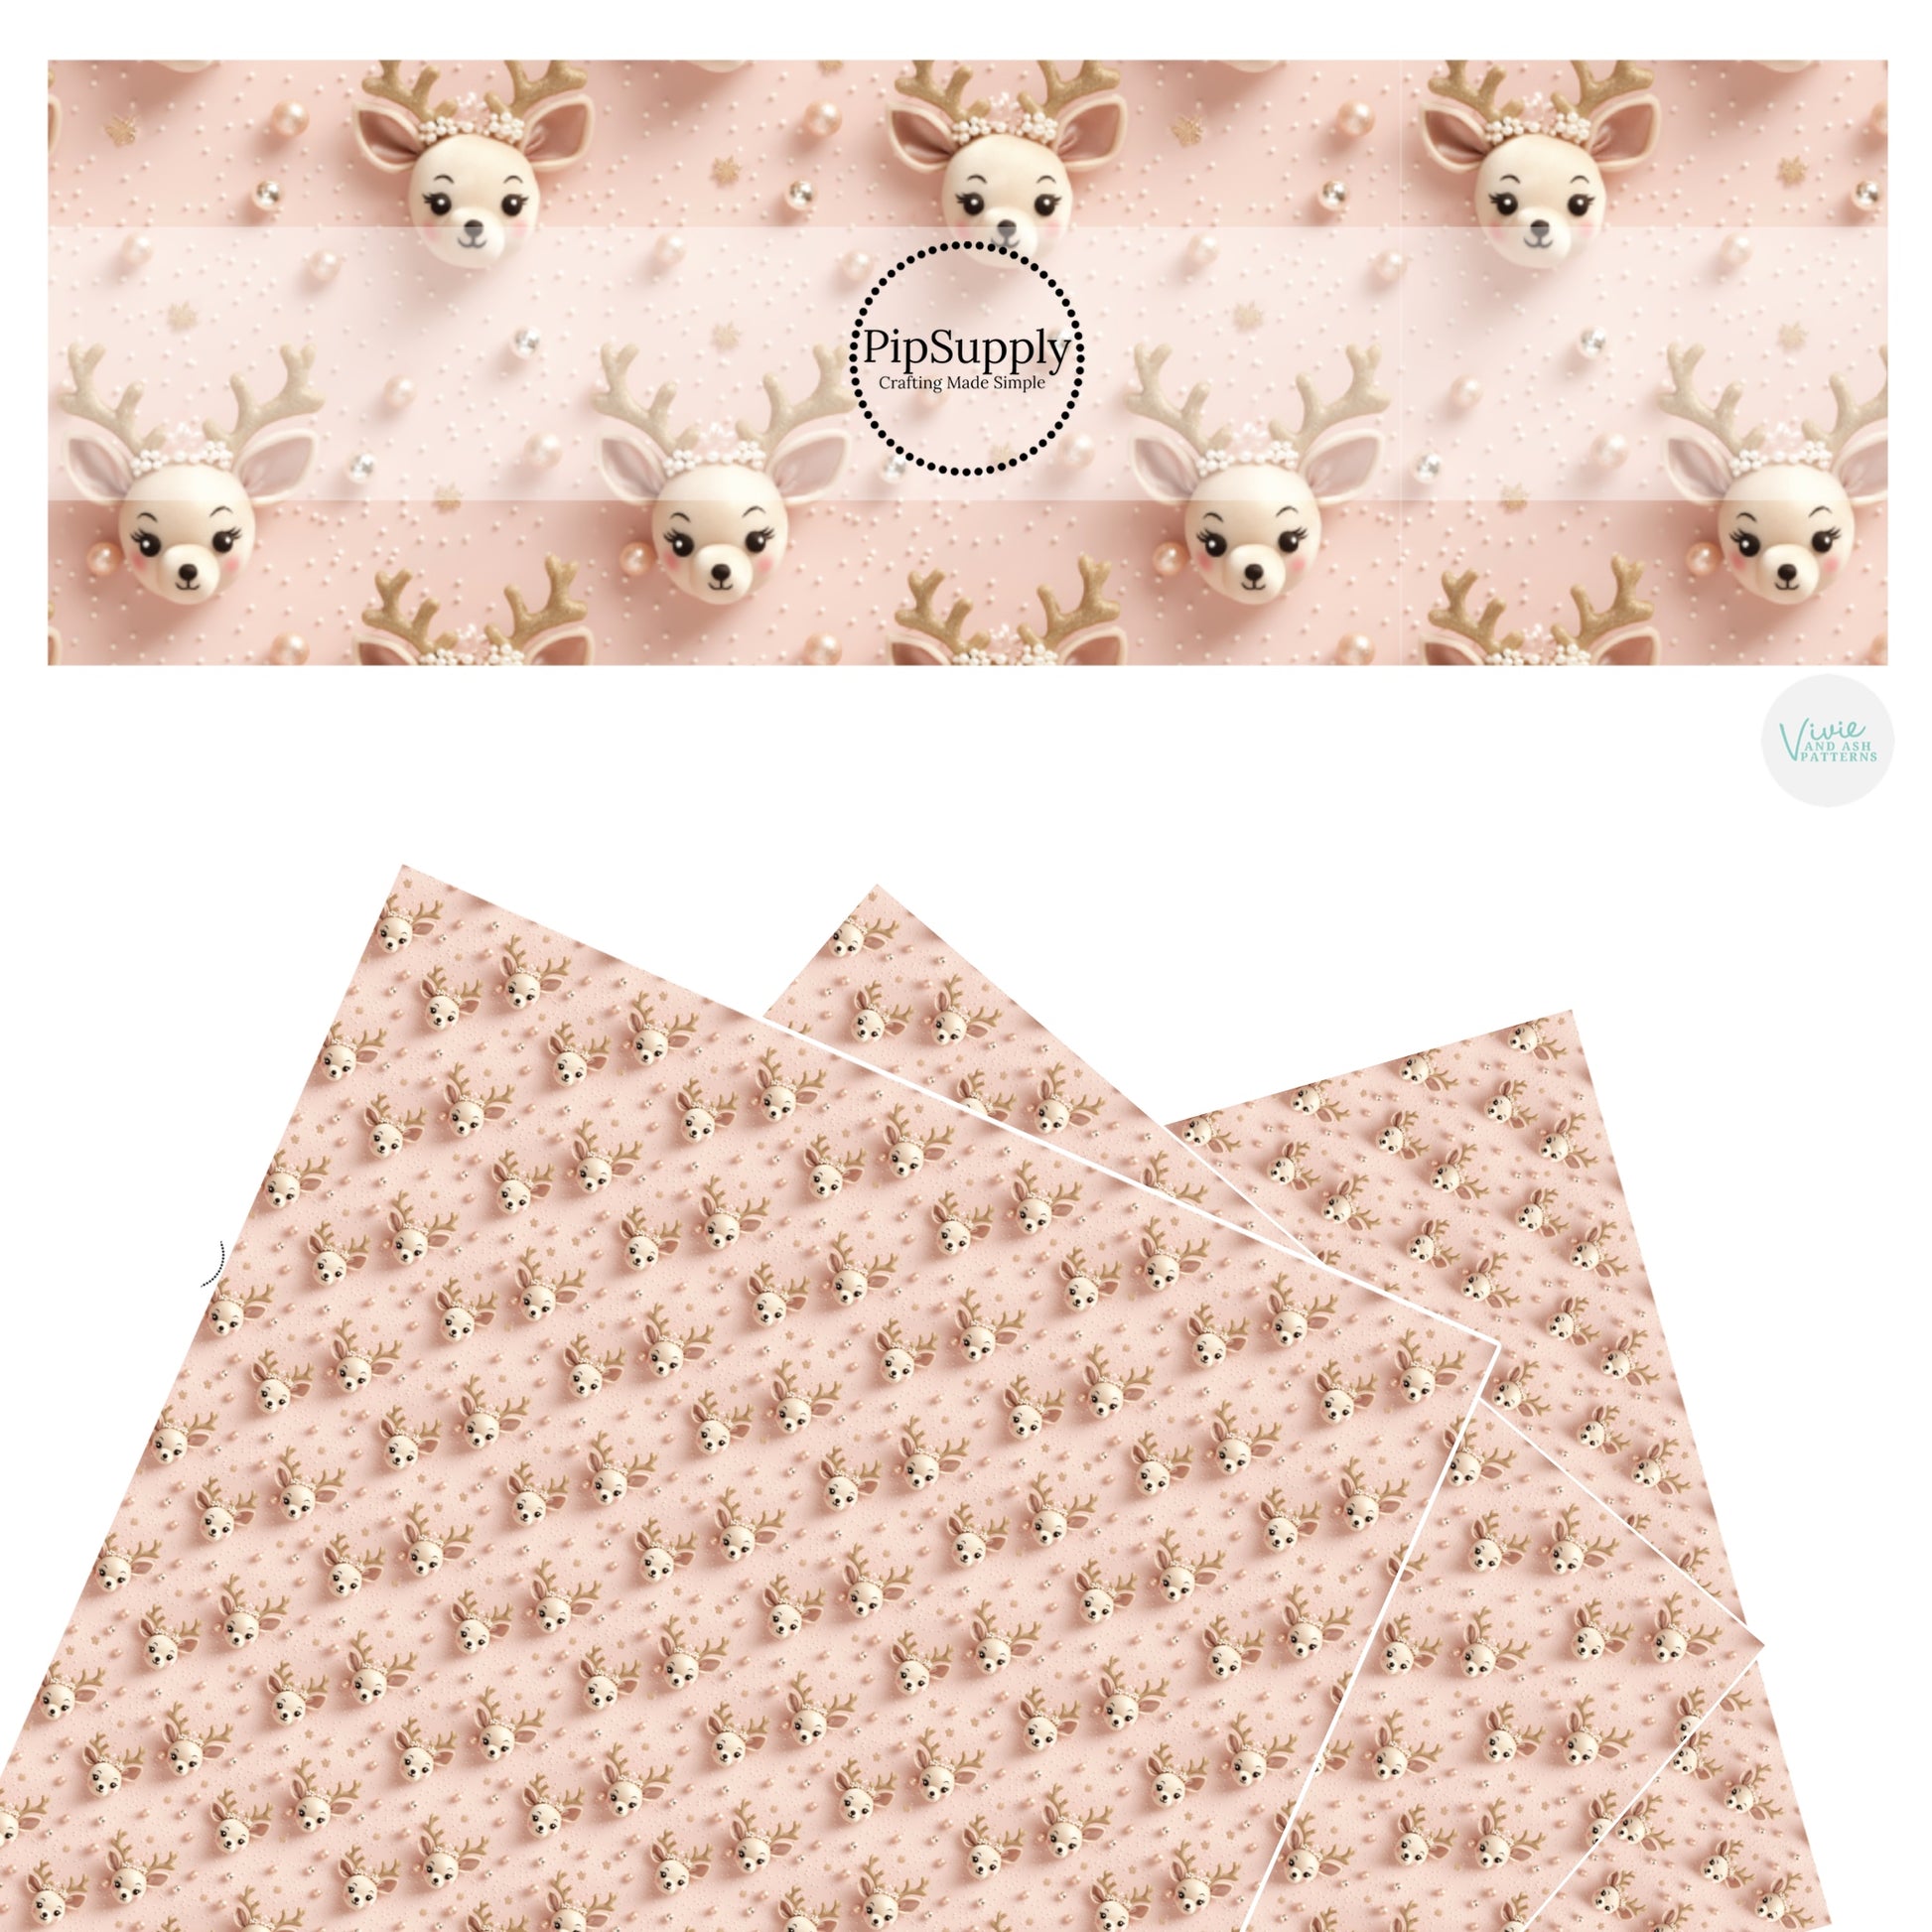 These holiday pattern themed faux leather sheets contain the following design elements: reindeers surrounded by rose gold pearls on light pink. Our CPSIA compliant faux leather sheets or rolls can be used for all types of crafting projects.